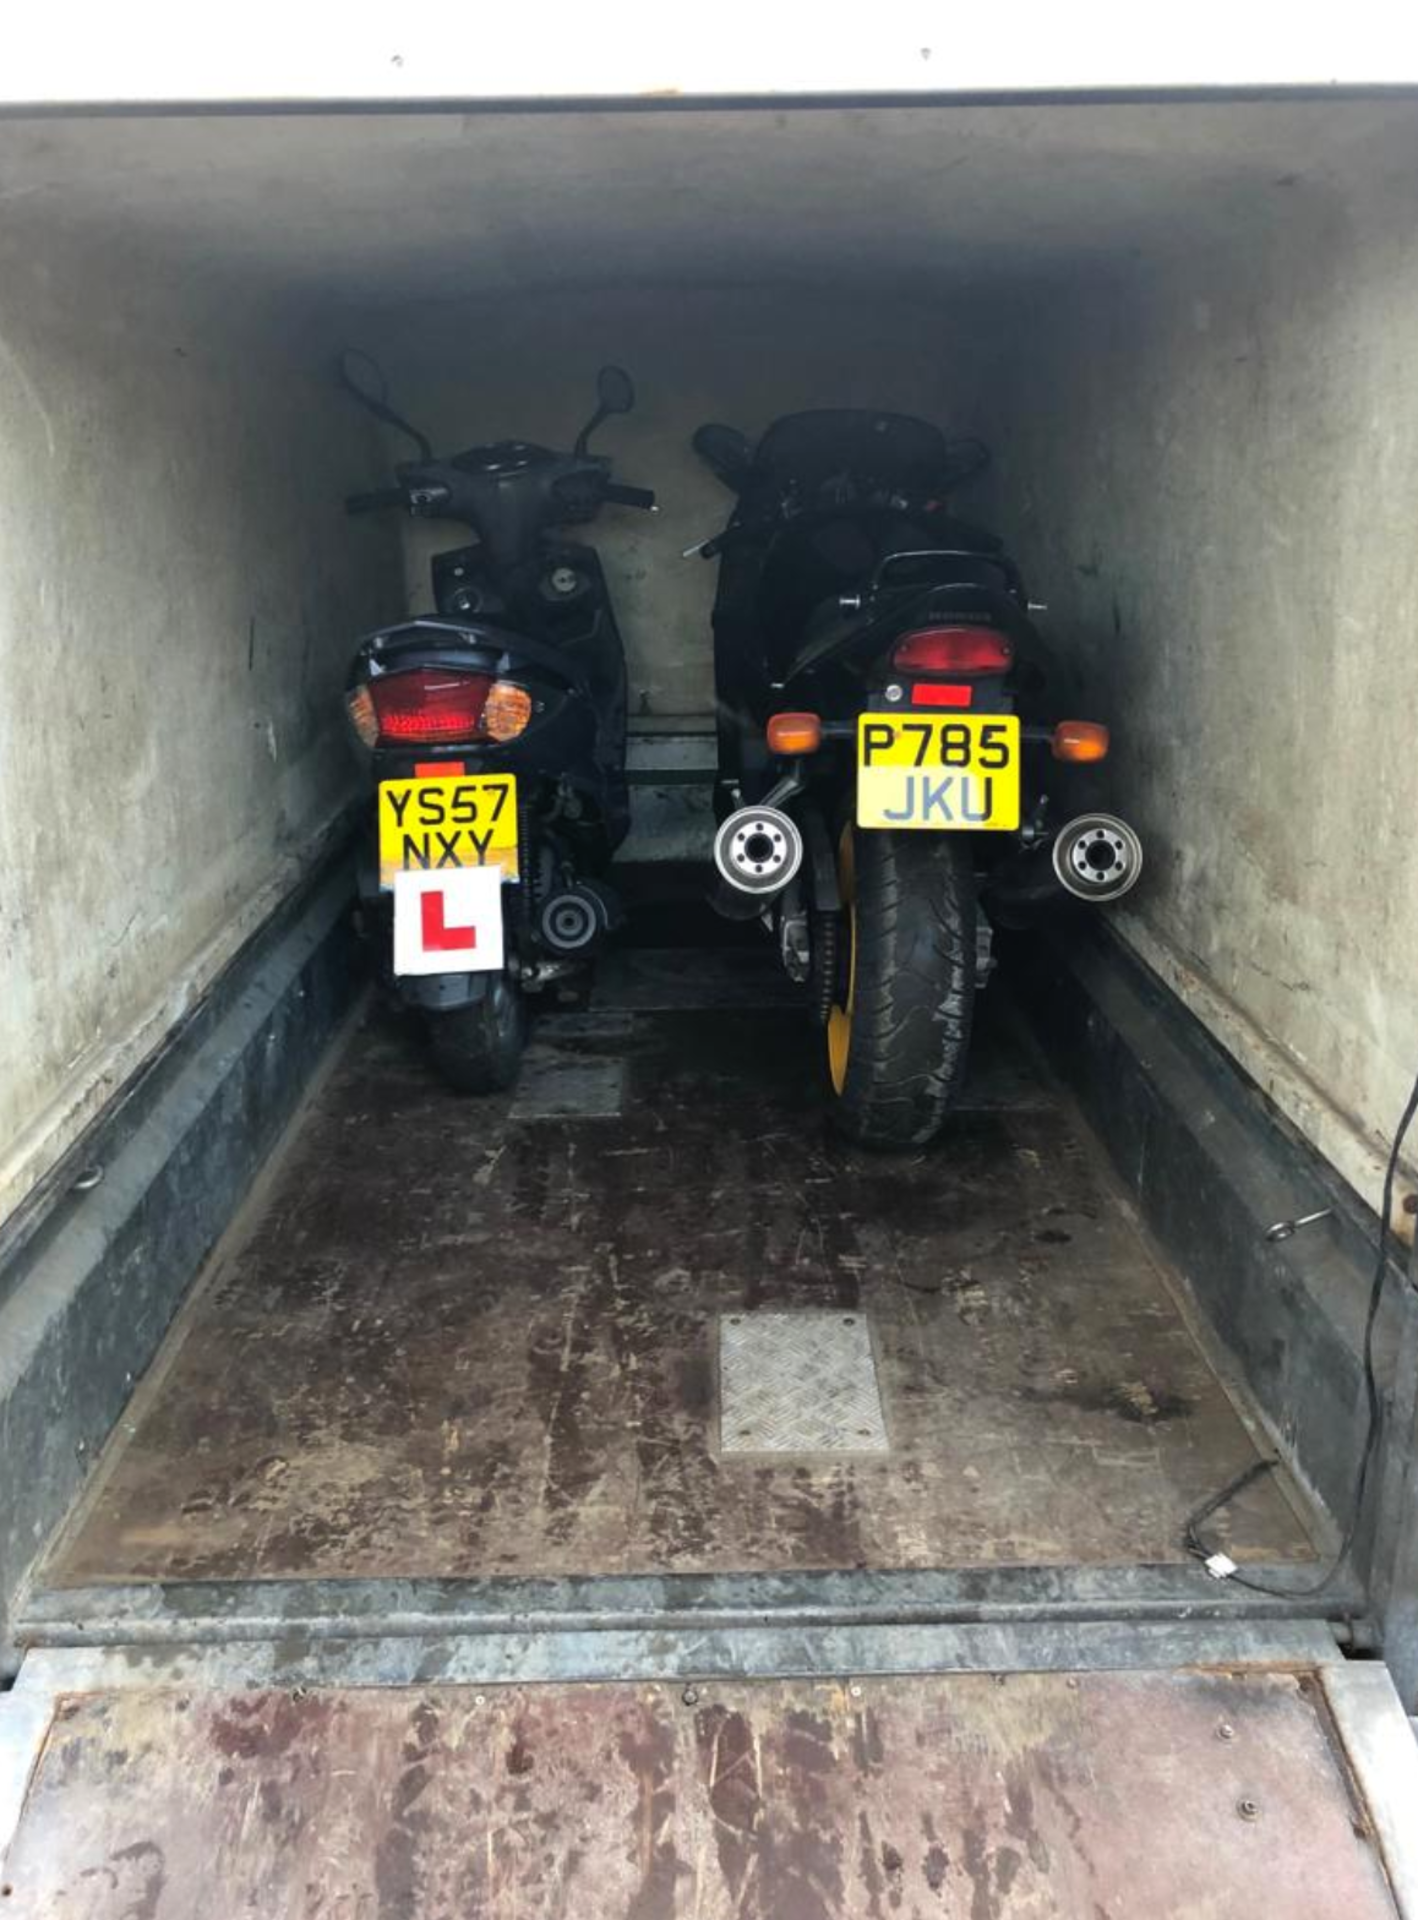 SPECIALIST SINGLE AXLE TOWABLE MOTORBIKE TRANSPORT COVERED TRAILER RAMP *PLUS VAT* - £1500 RESERVE! - Image 8 of 8